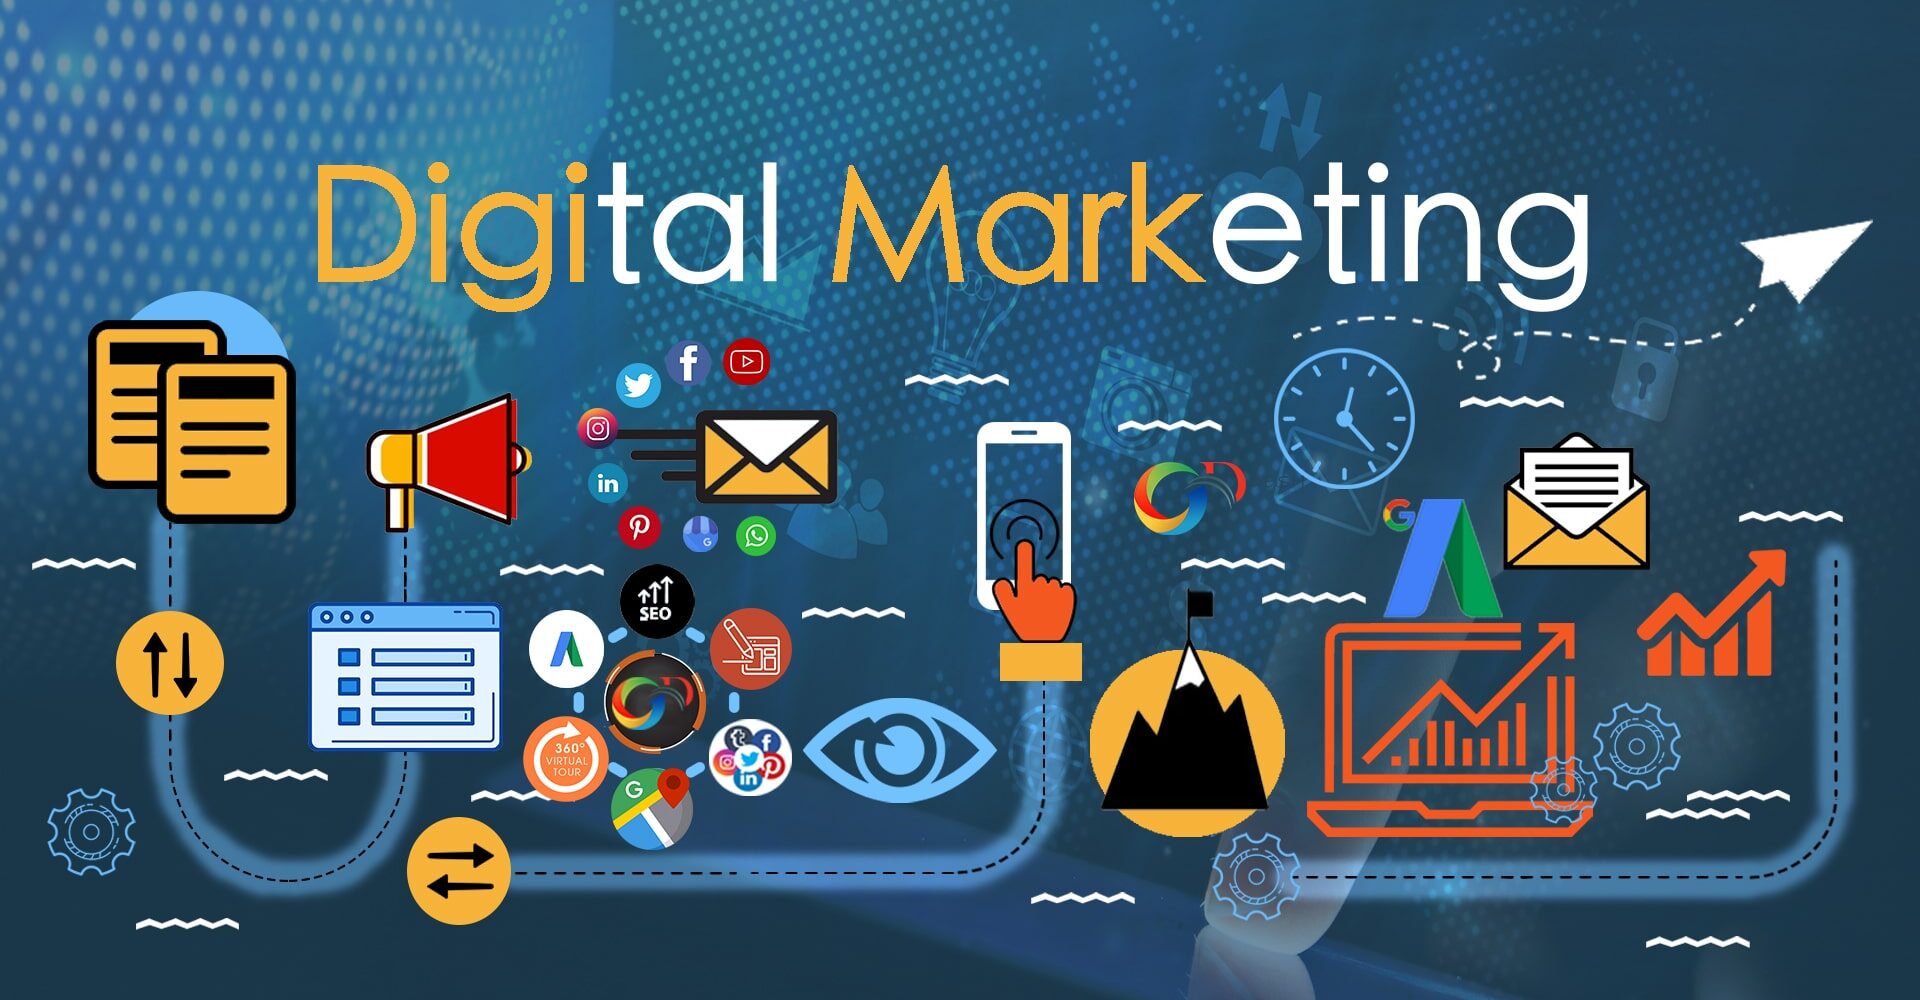 Why Digital Marketing Skills are Crucial for Your Career Development